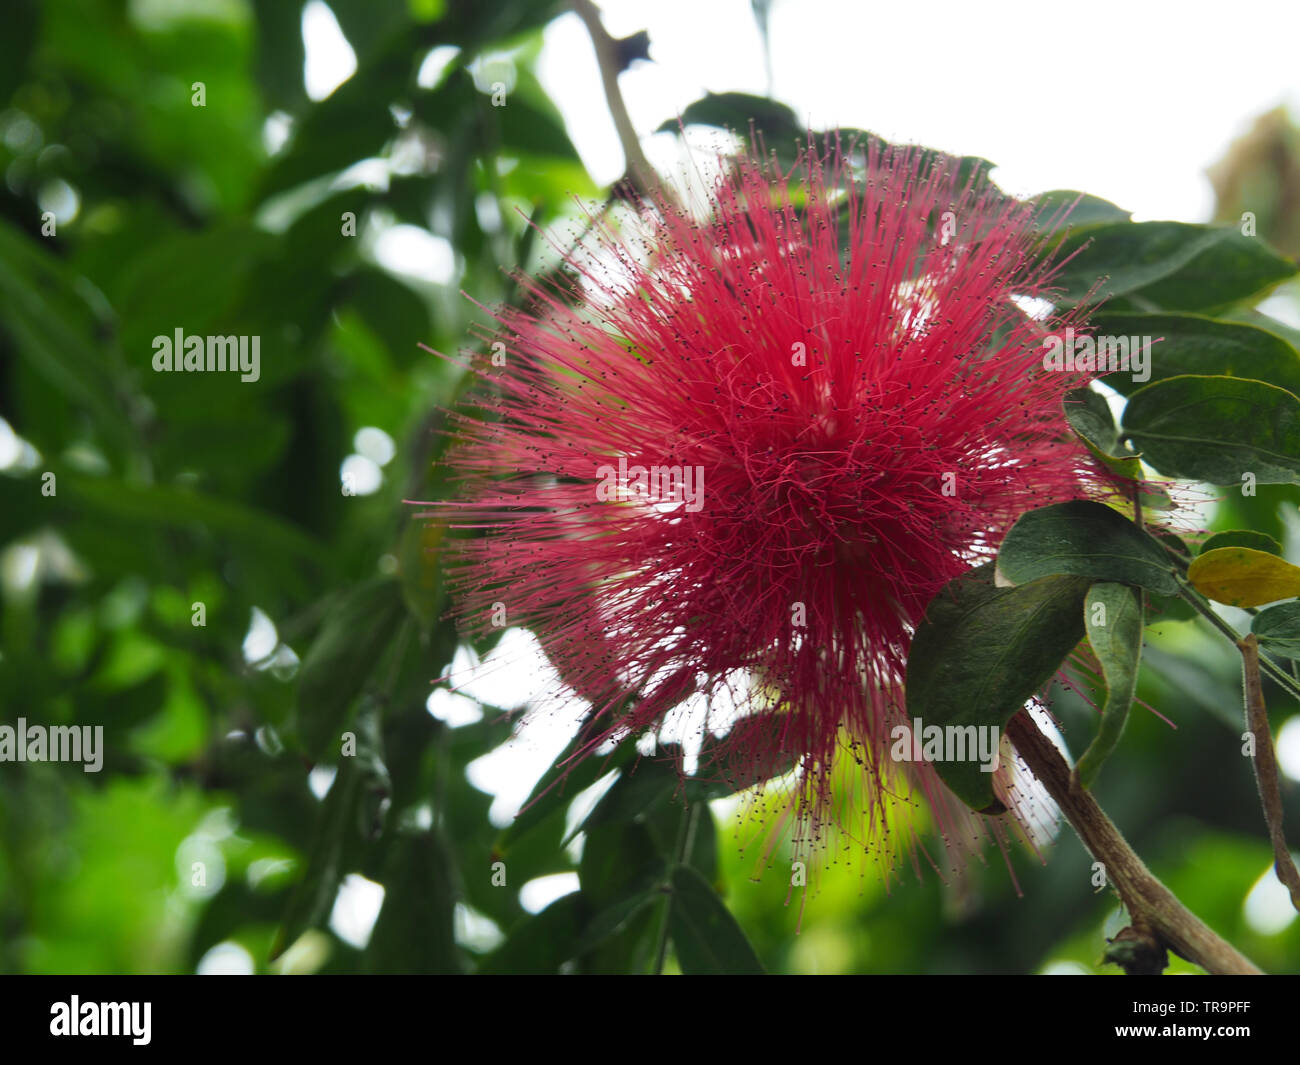 red ball-like flower of a plant in the greenhouse of the shinjuku parks in tokyo japan Stock Photo